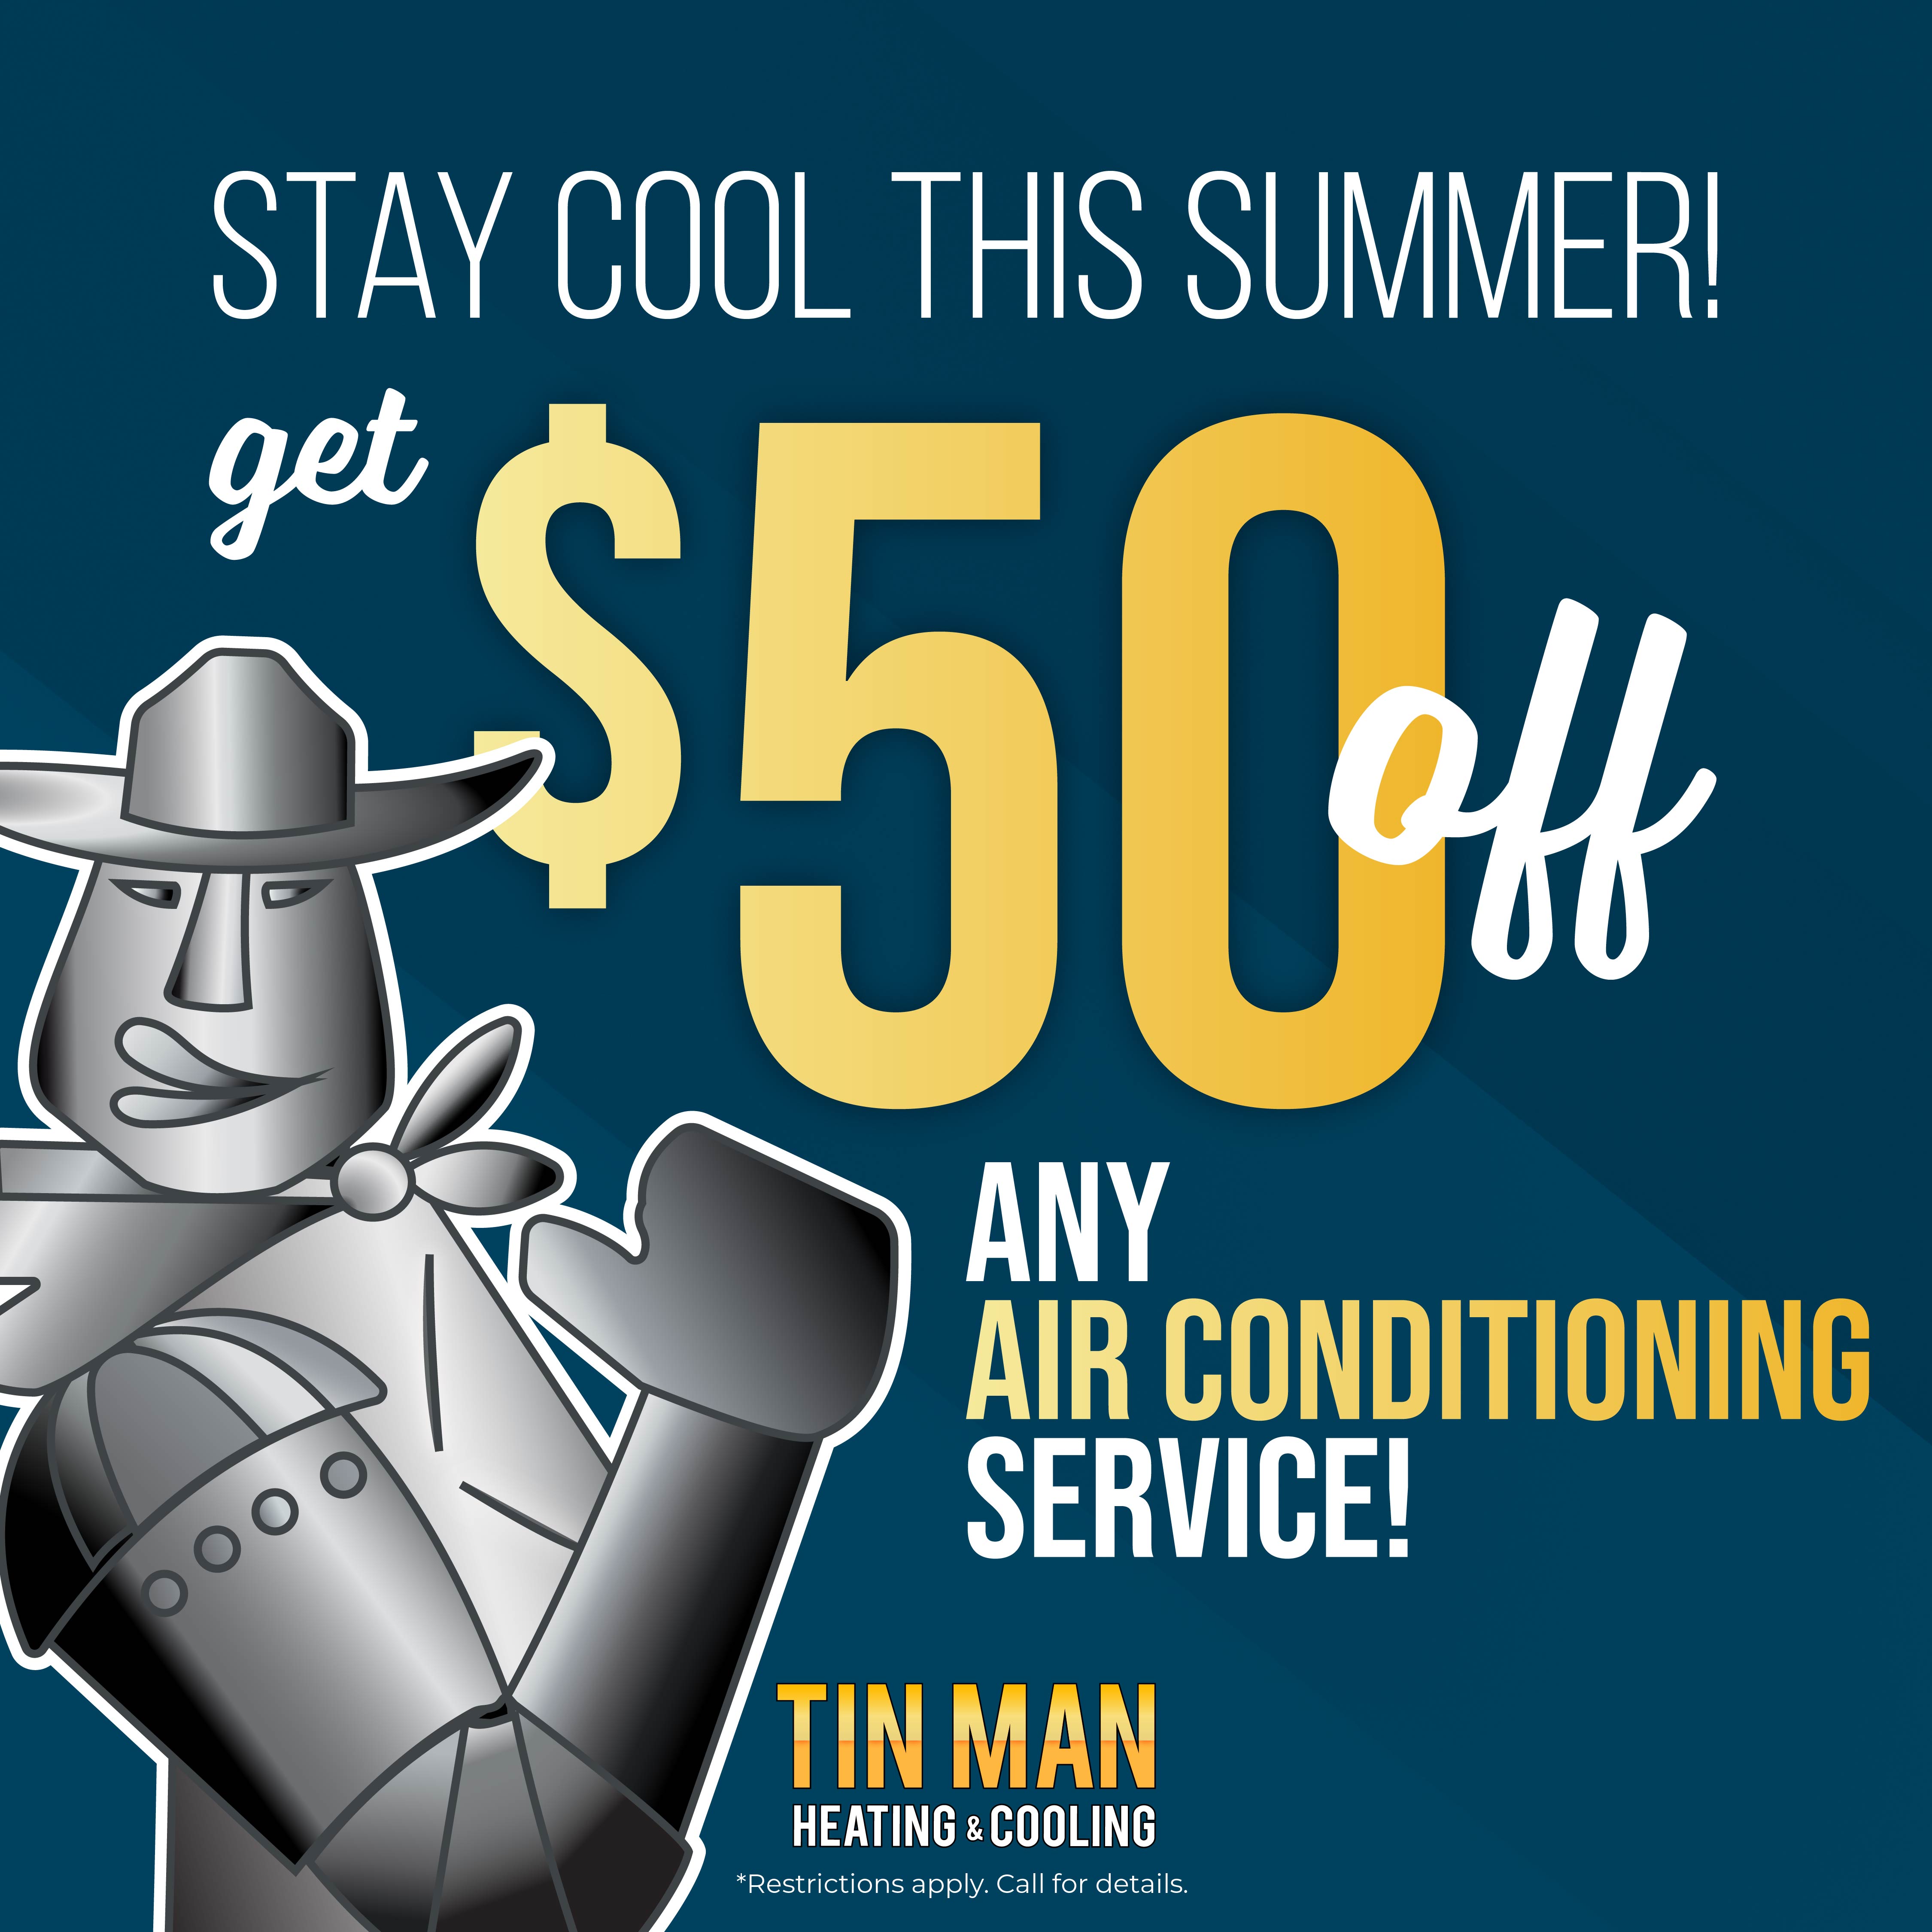 Call Tin Man Heating and Cooling, Inc. for AC today!